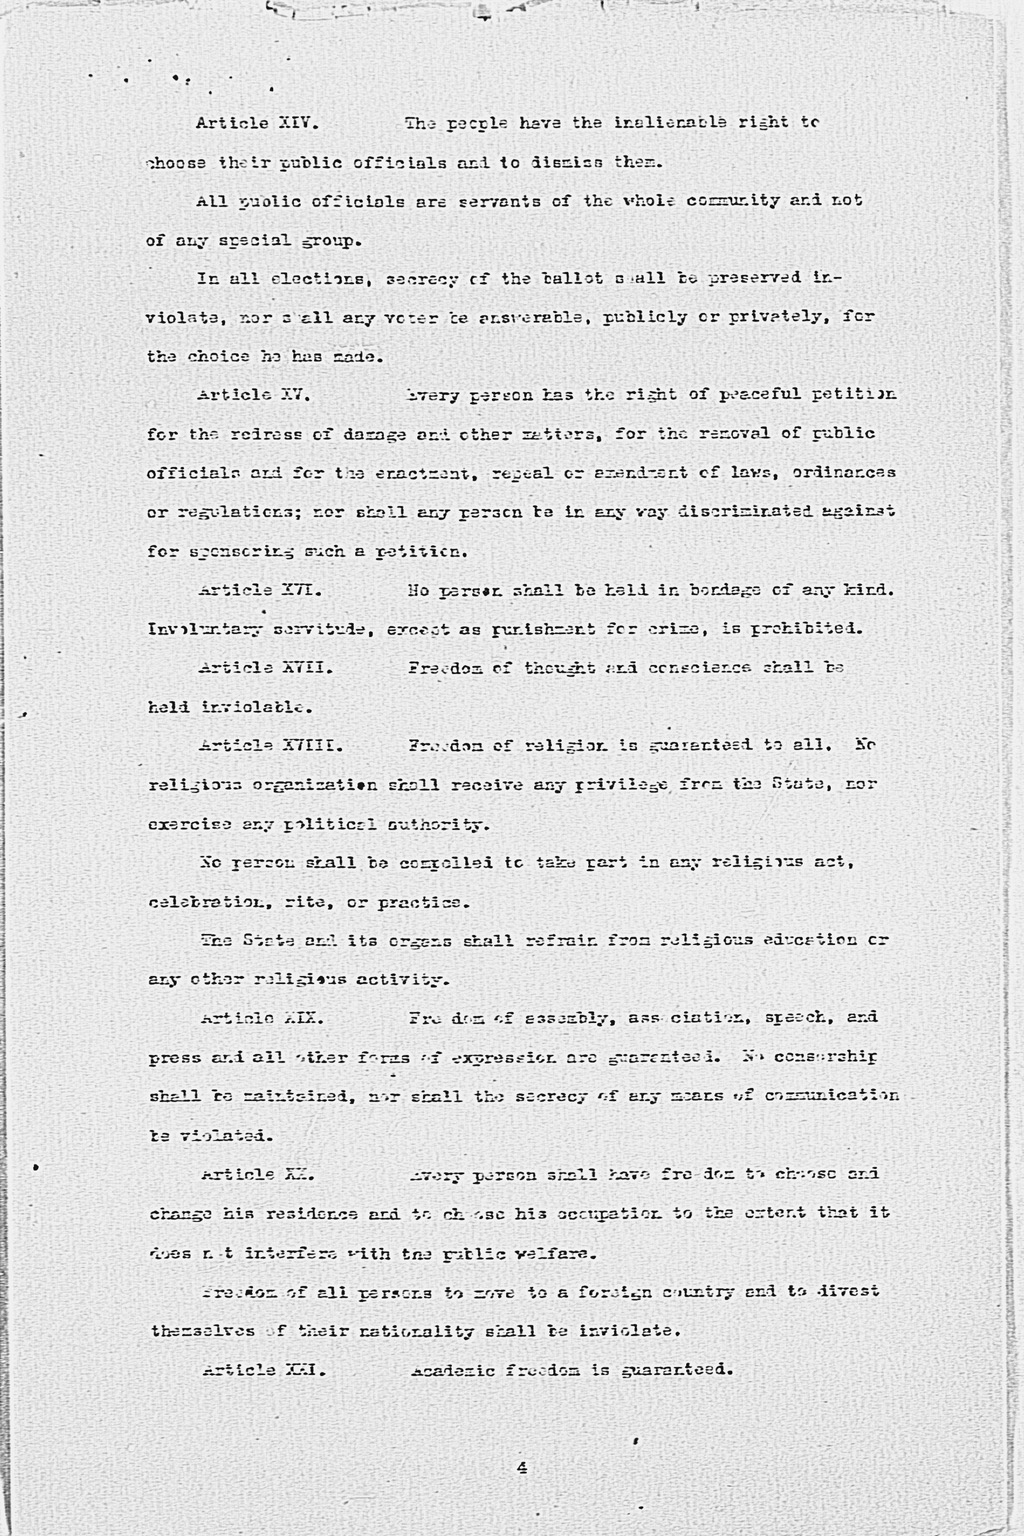 [Max W. Bishop to the Secretary of State, Subject: Japanese Government's Draft Constitution](Larger image)